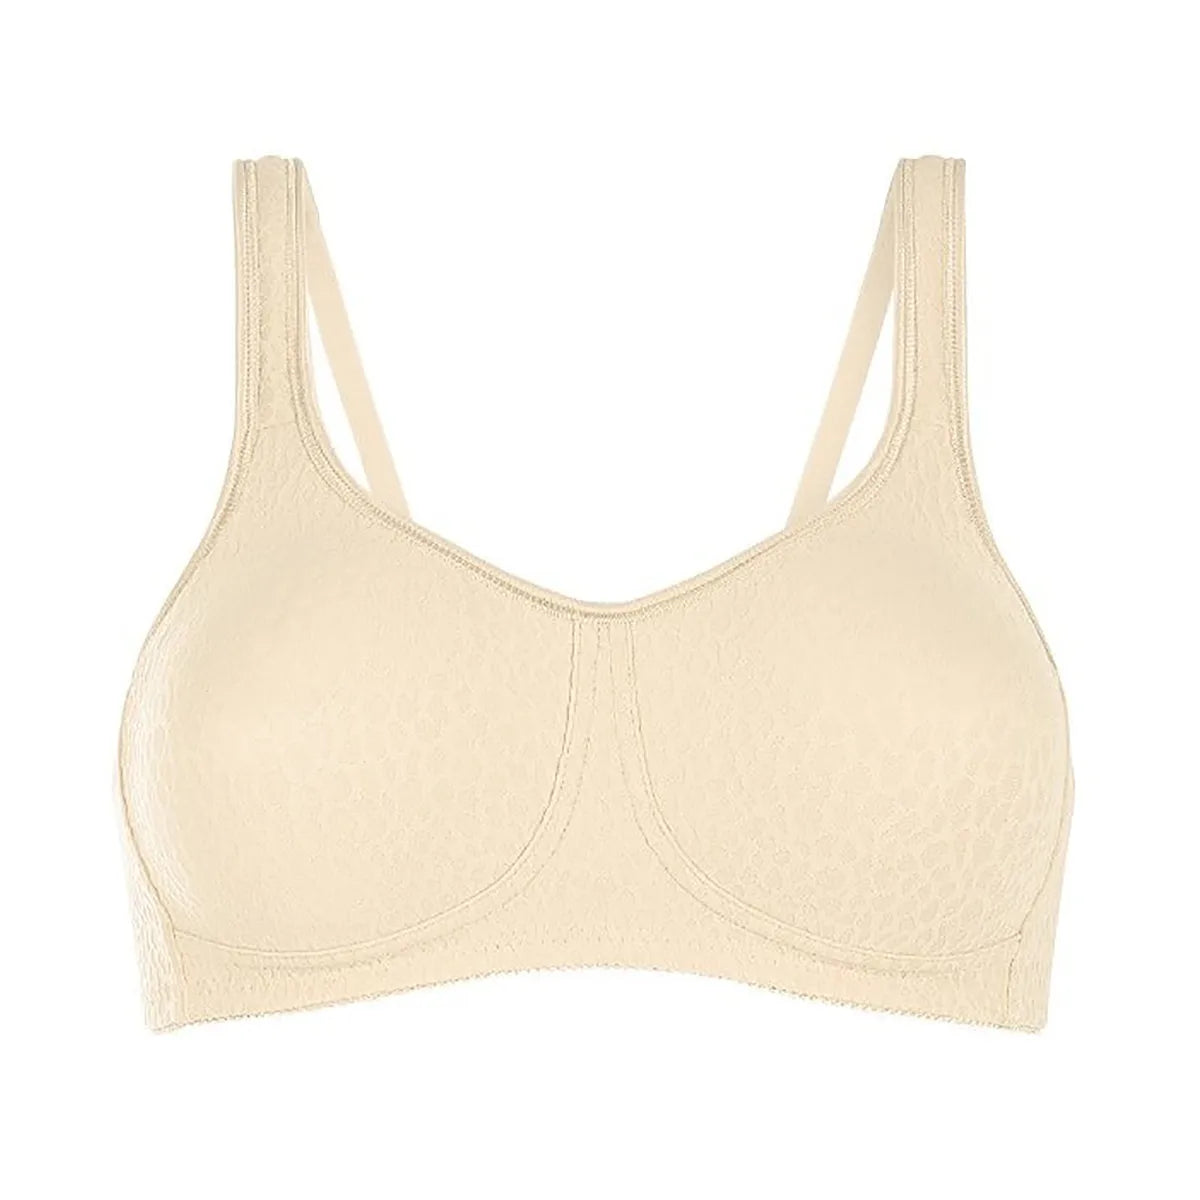 Camille Lace Non-Wired Full Cup Support Bilateral Mastectomy Bra - White /  Black - AbuMaizar Dental Roots Clinic